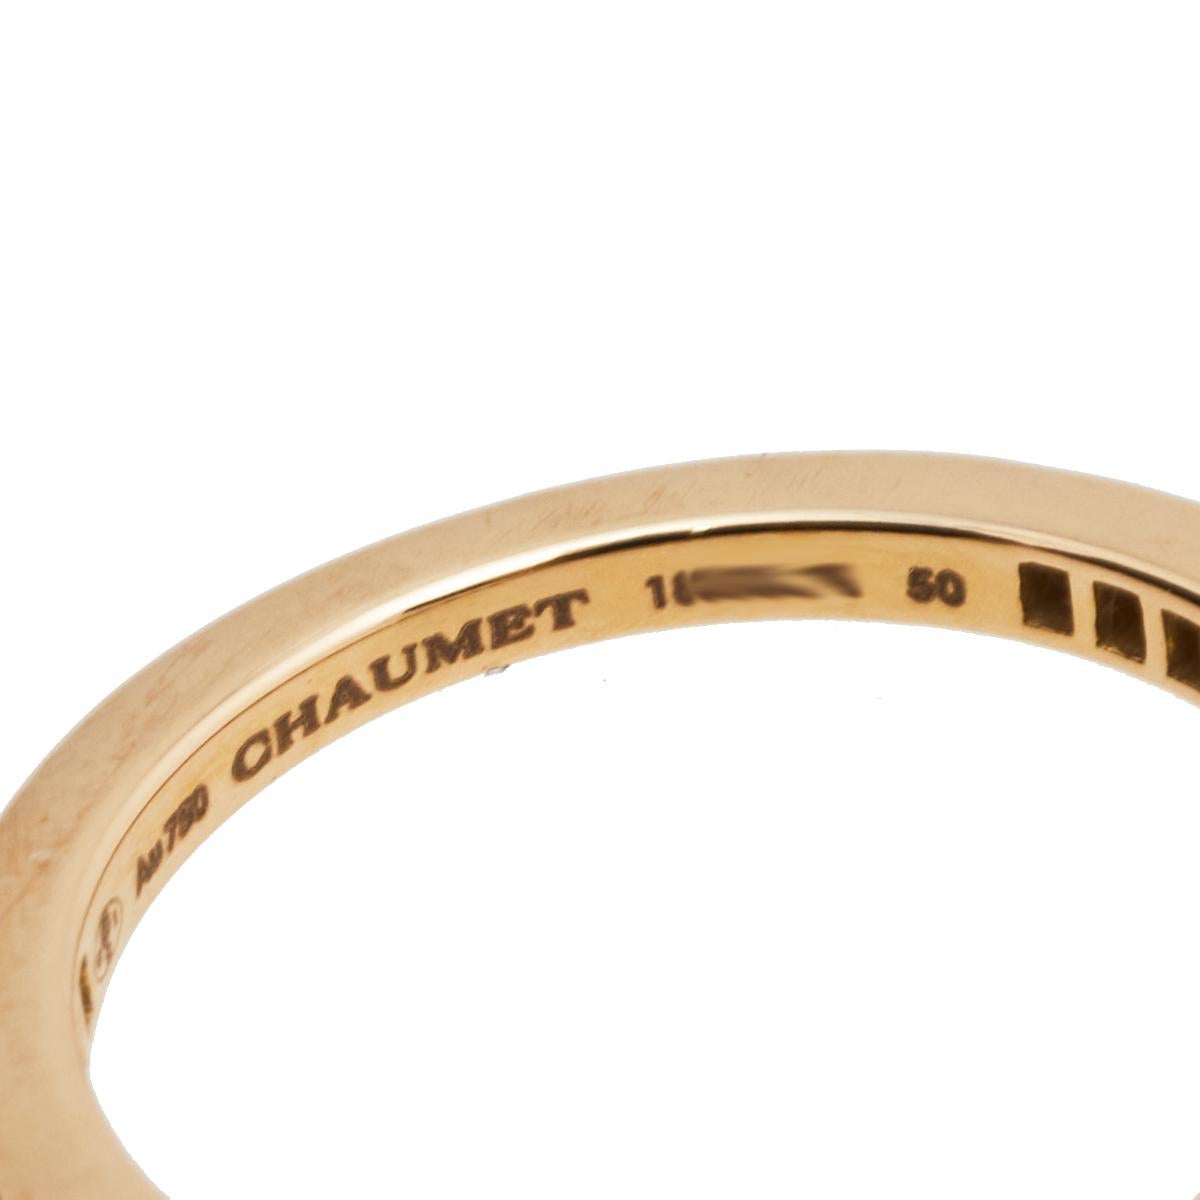 Contemporary Chaumet Triomphe de Chaumet Diamond 18K Rose Gold Wedding Band Ring Size 50